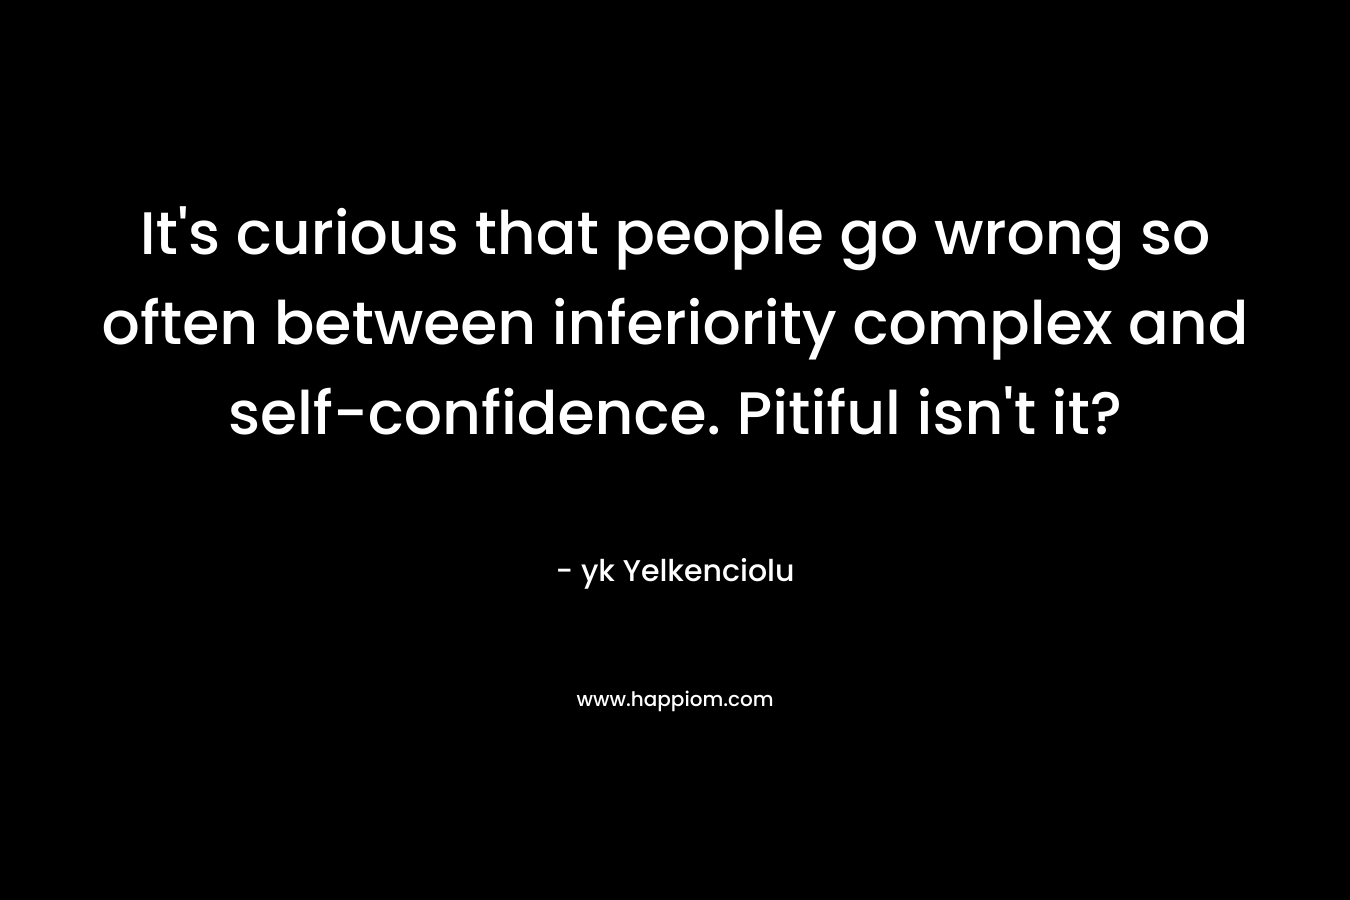 It's curious that people go wrong so often between inferiority complex and self-confidence. Pitiful isn't it?